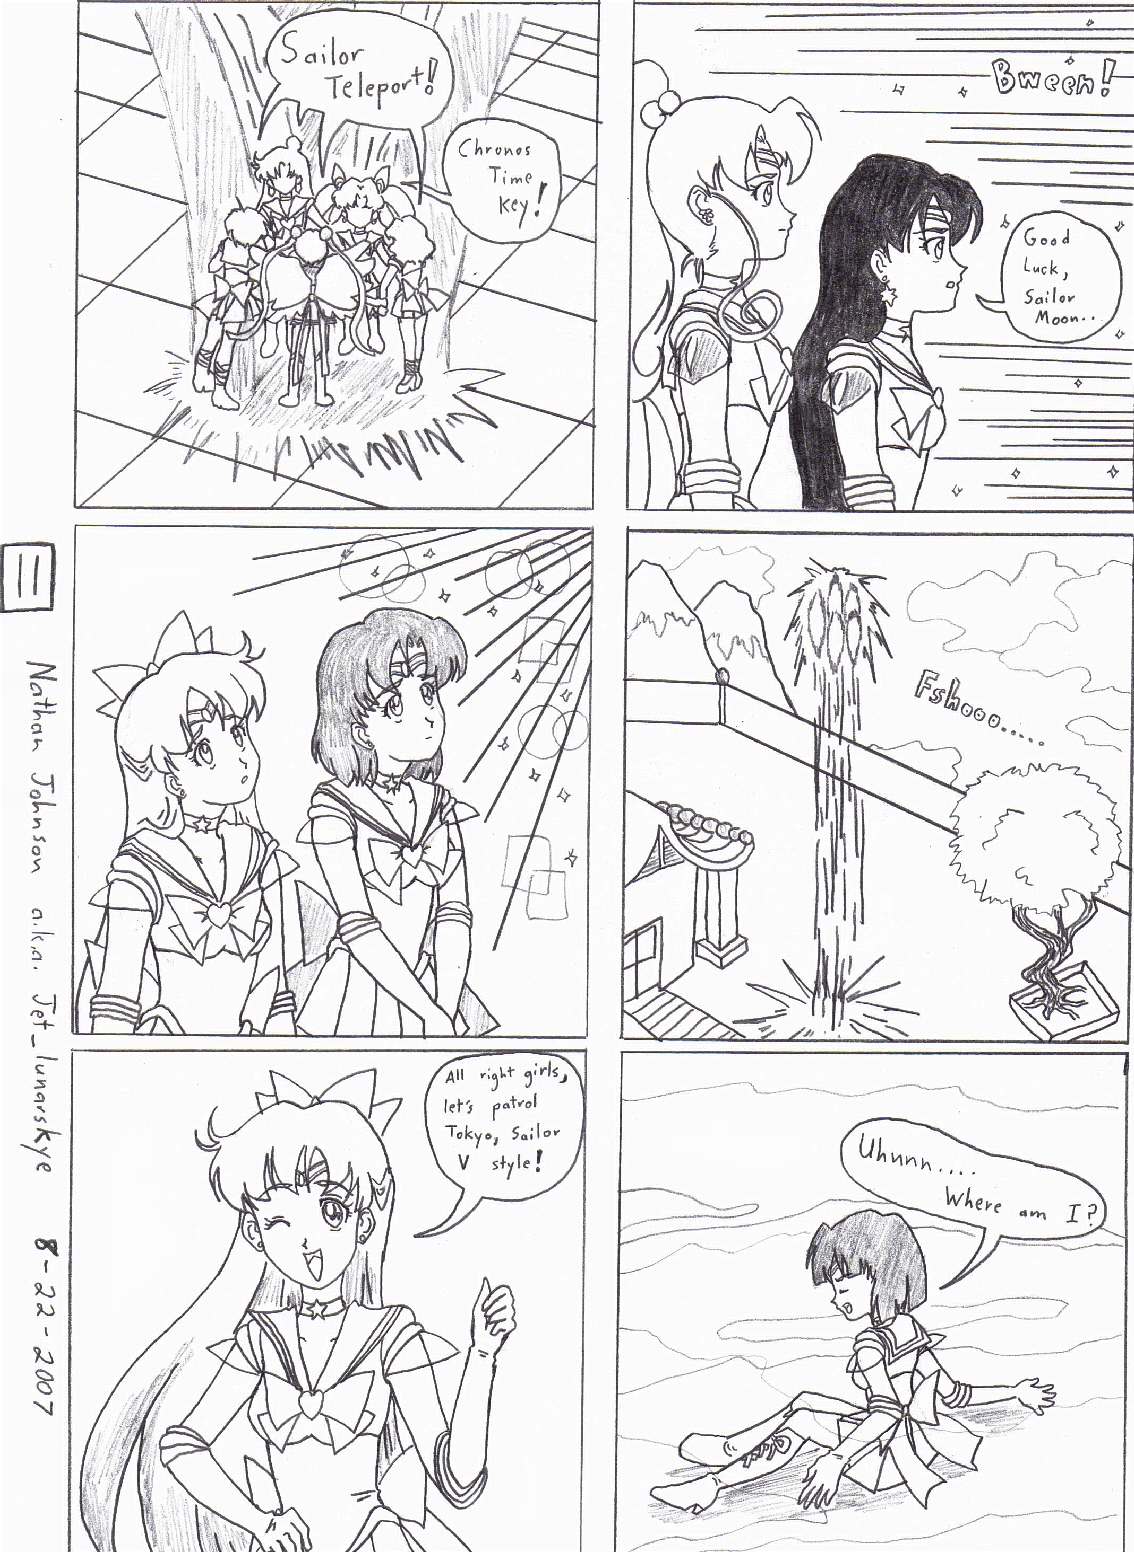 Sailor Moon Stars: The Nightmare Soldier Page 11 by Jet_lunarskye